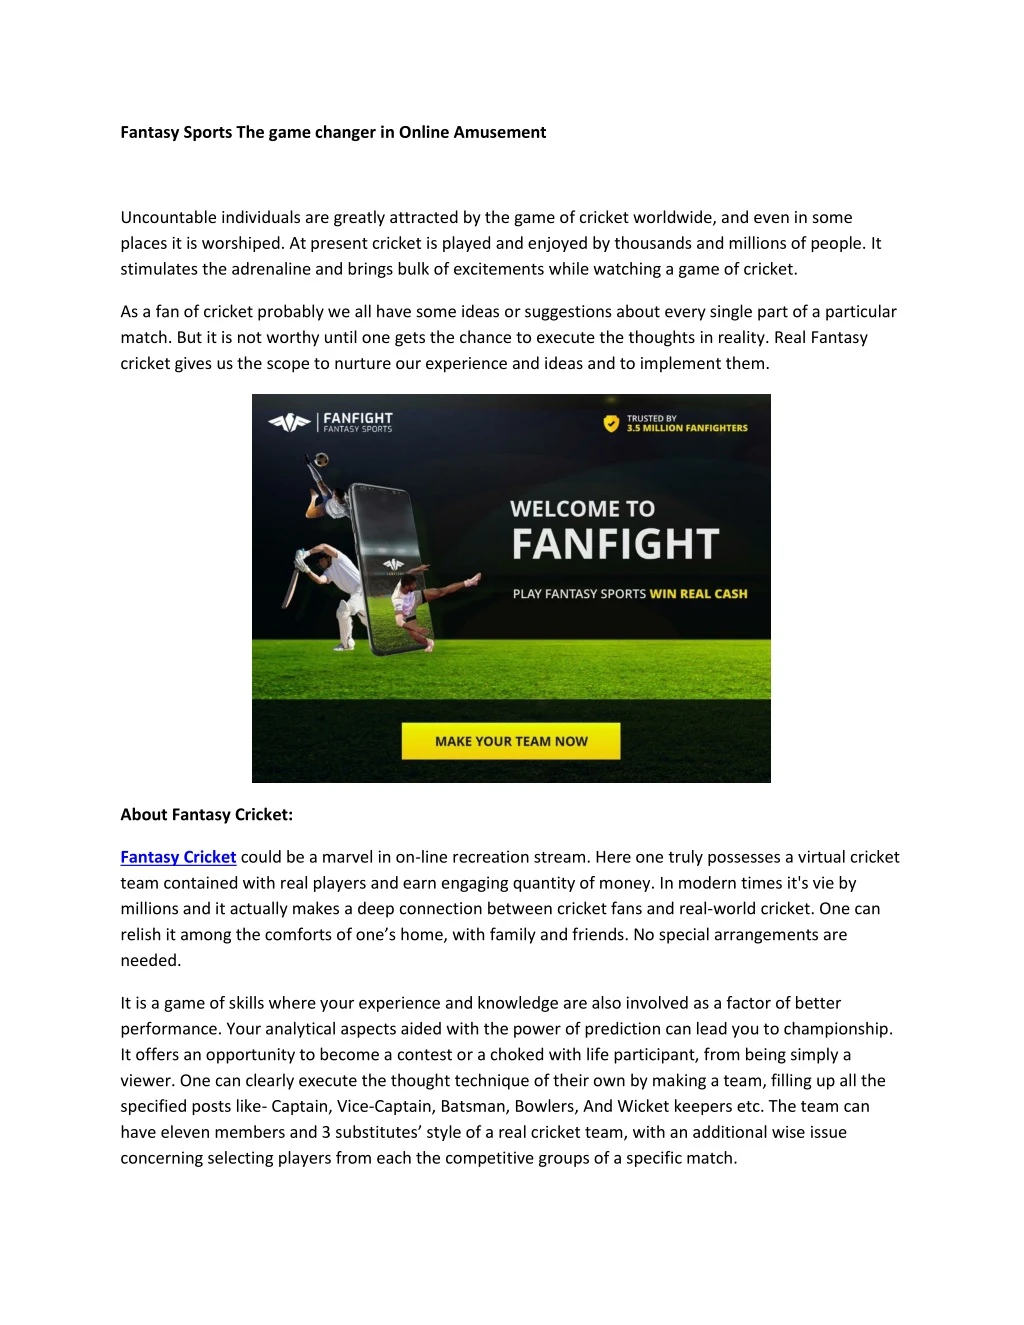 fantasy sports the game changer in online